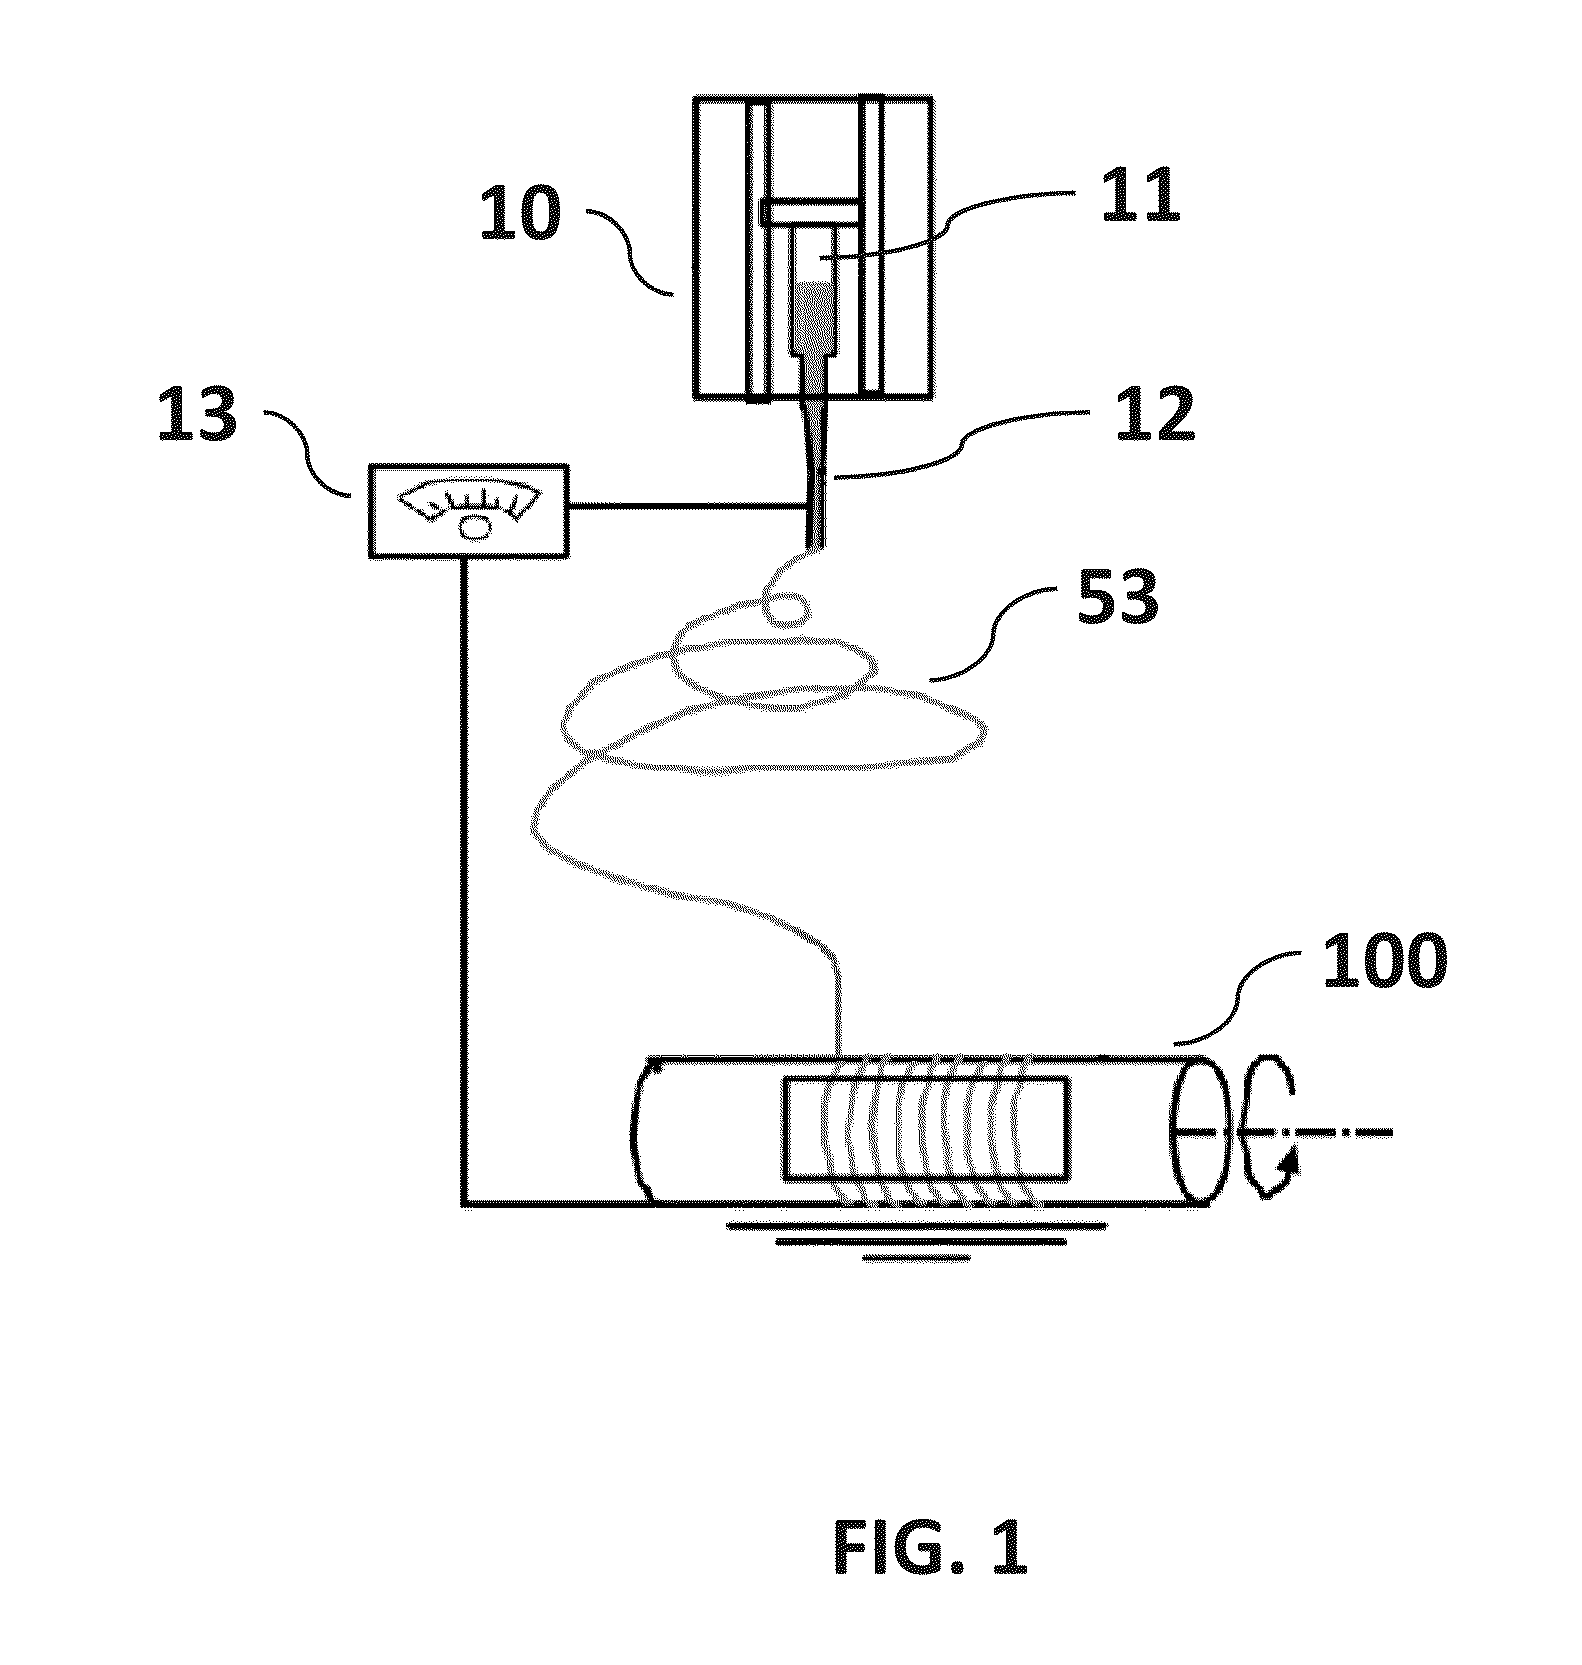 Method and apparatus for controlled alignment and deposition of branched electrospun fiber